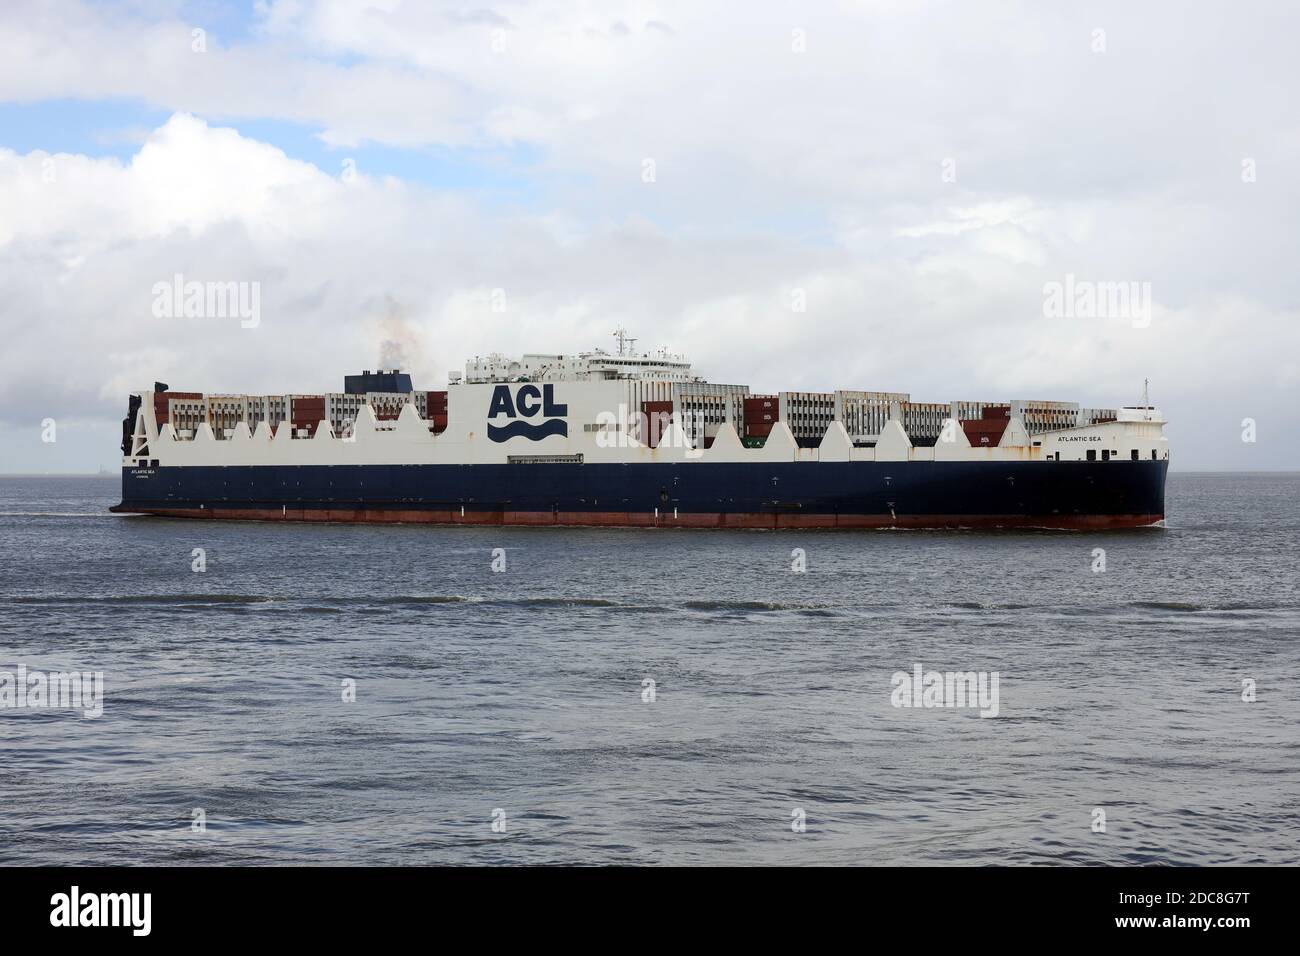 The Con-Ro ship Atlantic Sea will pass Cuxhaven on August 23, 2020 on its way to Hamburg. Stock Photo